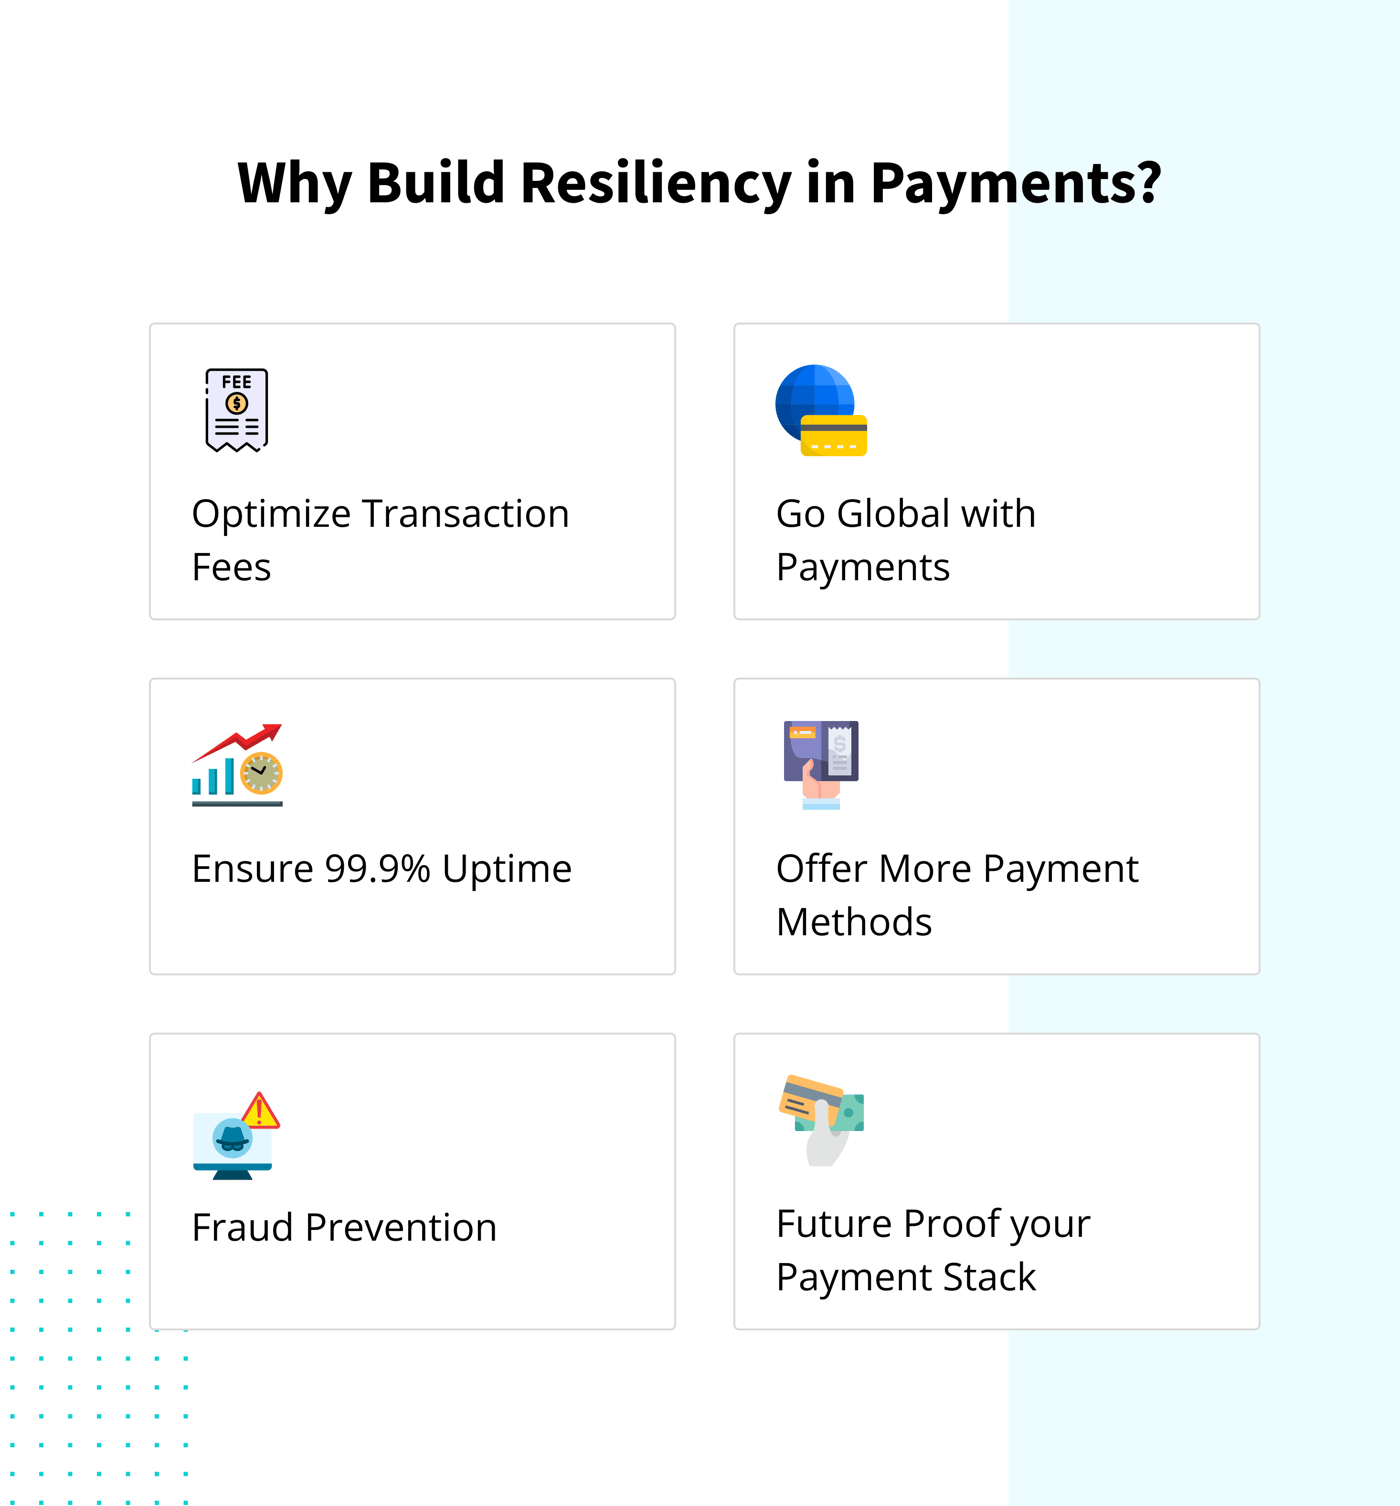  Build Resiliency in Payment Stack